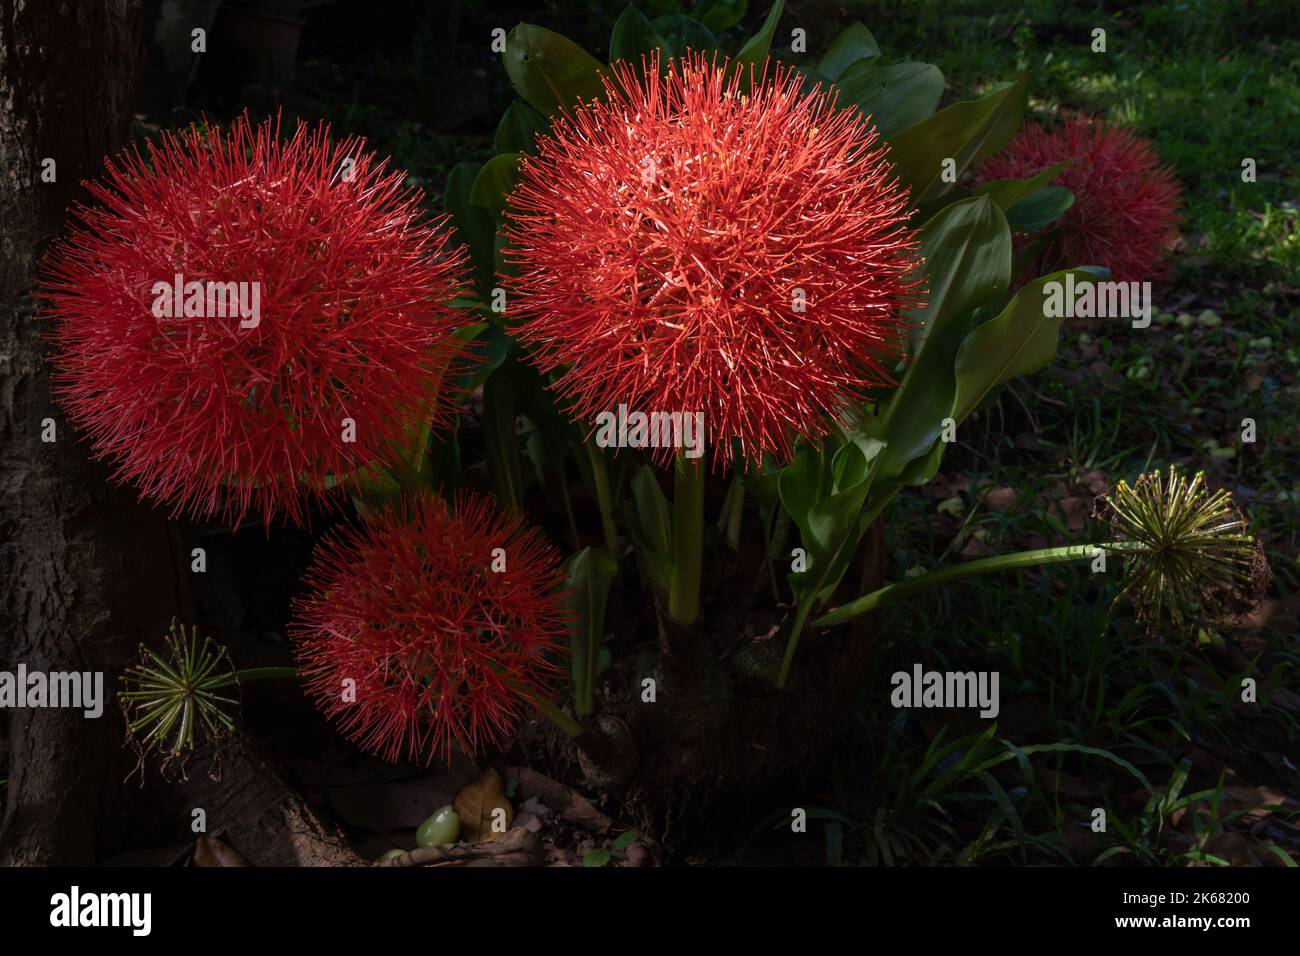 Closeup view of bright orange red flowers of scadoxus multiflorus aka blood lily in outdoor tropical garden in morning sunlight on natural background Stock Photo